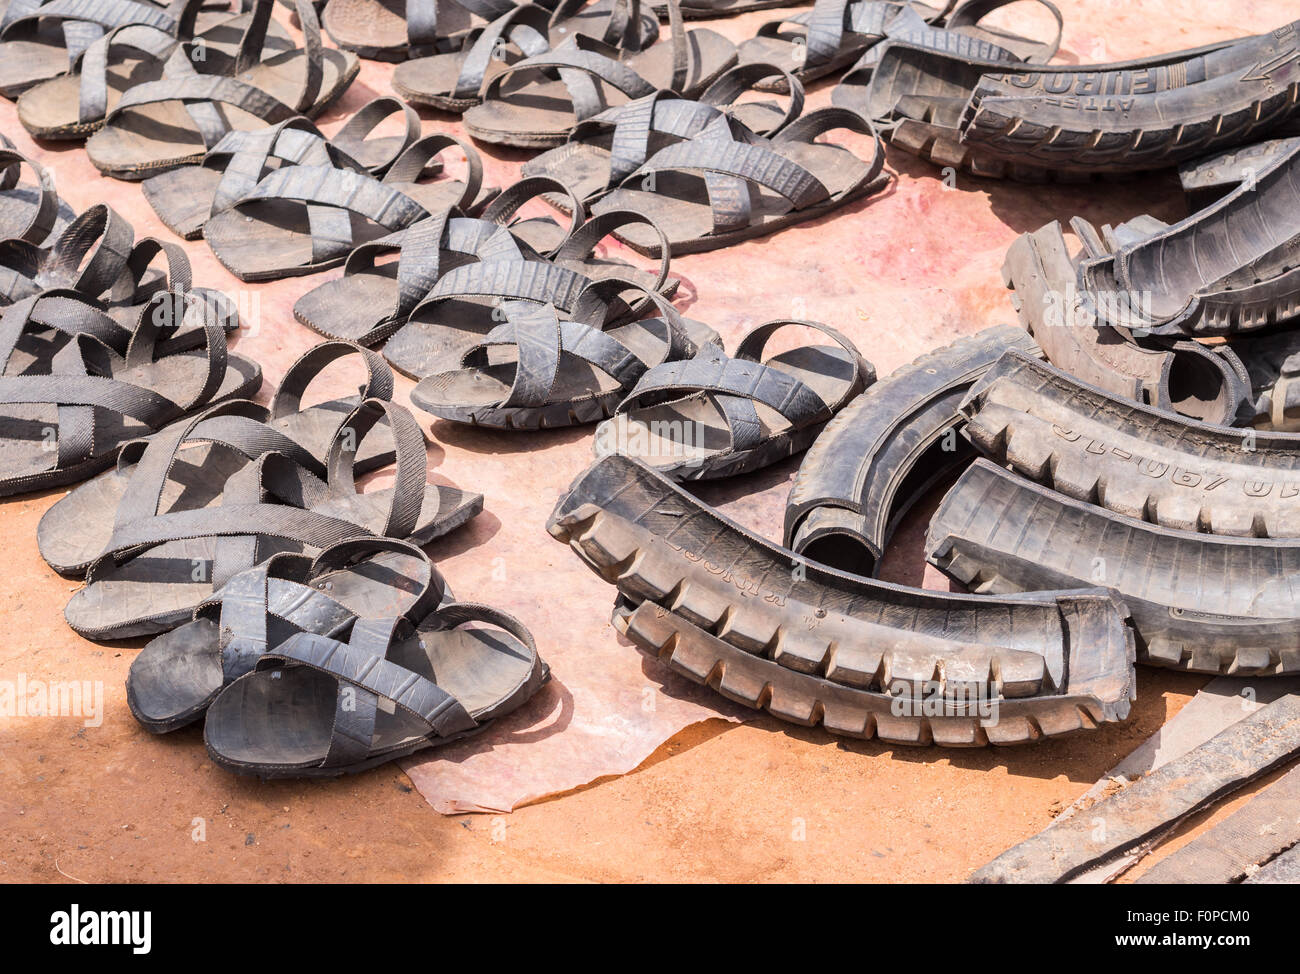 Sandals made of old tires on a local Maasai market in Handeni region,  Tanzania, africa Stock Photo - Alamy